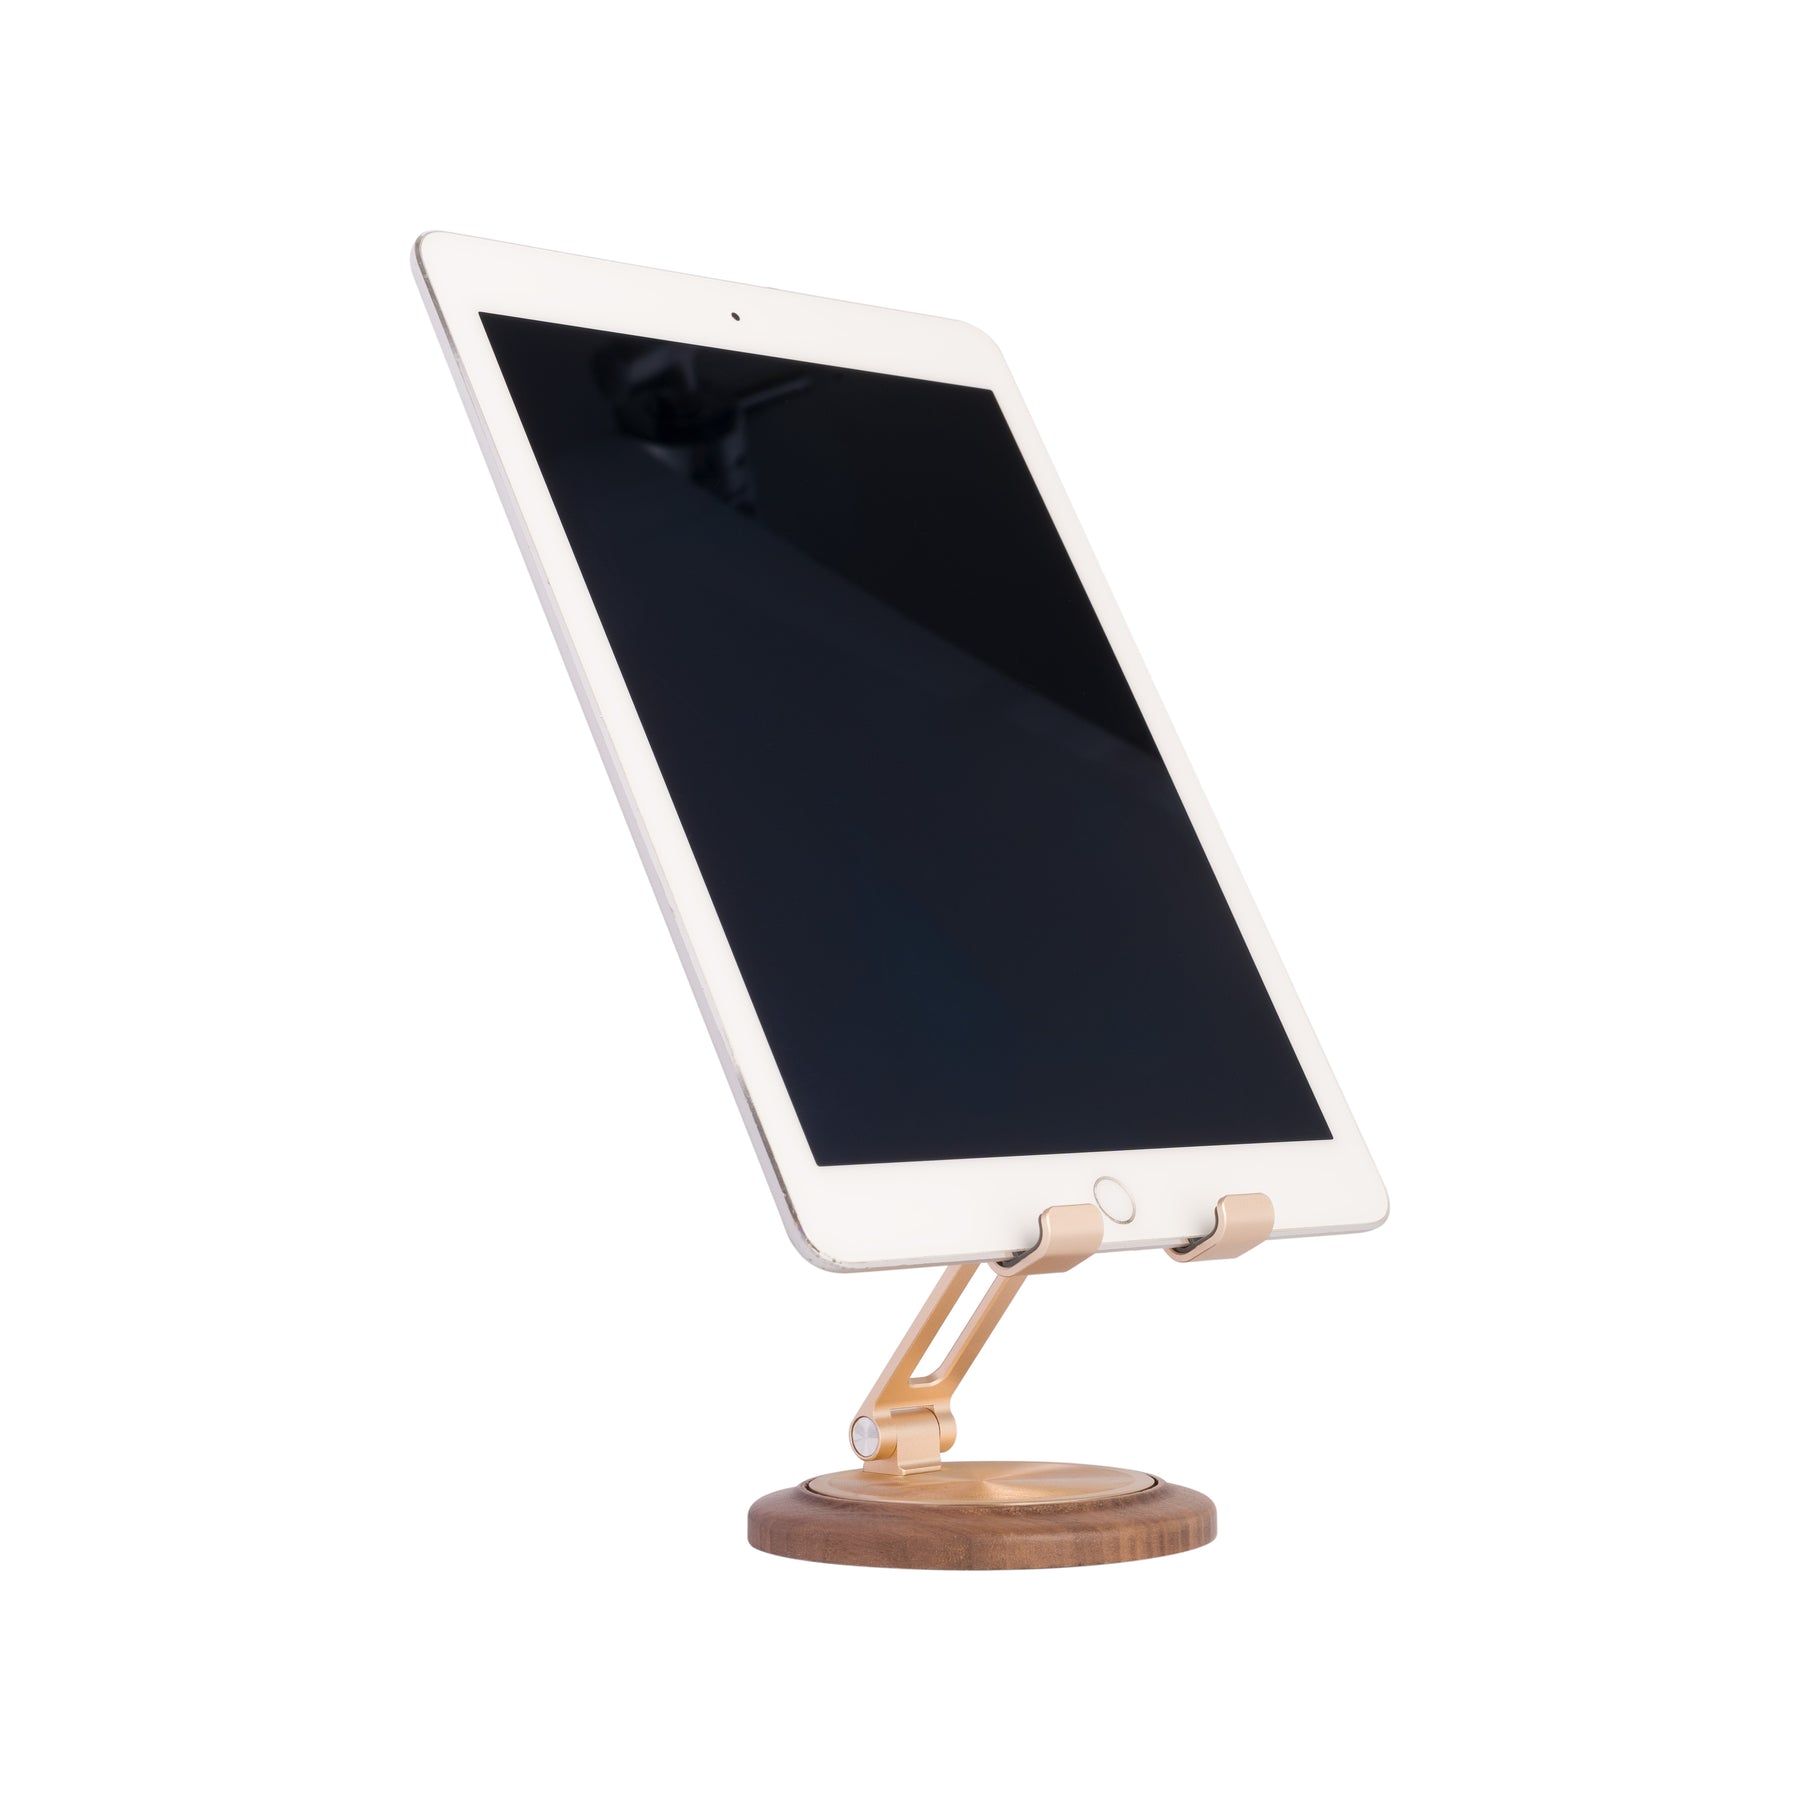 Premium Wood Base and Aluminum Alloy Stand